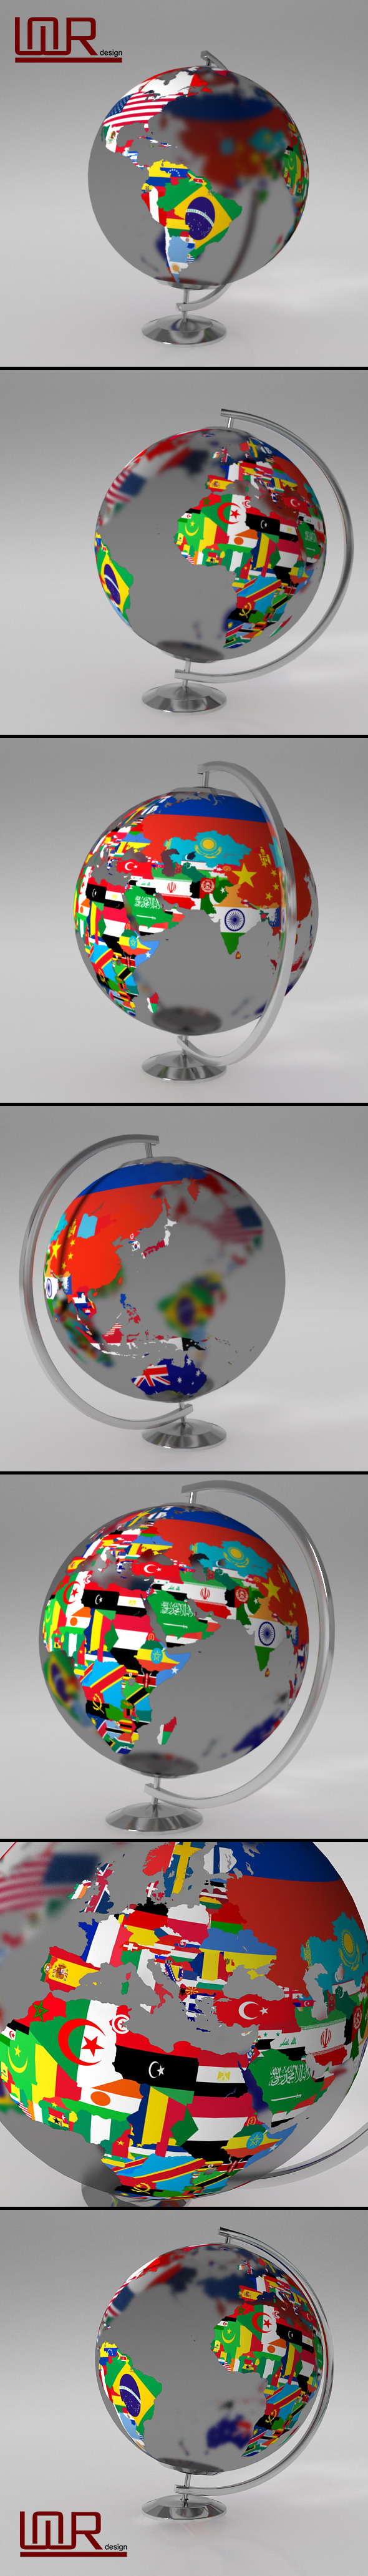 Earth Globe (World Map with Flags)